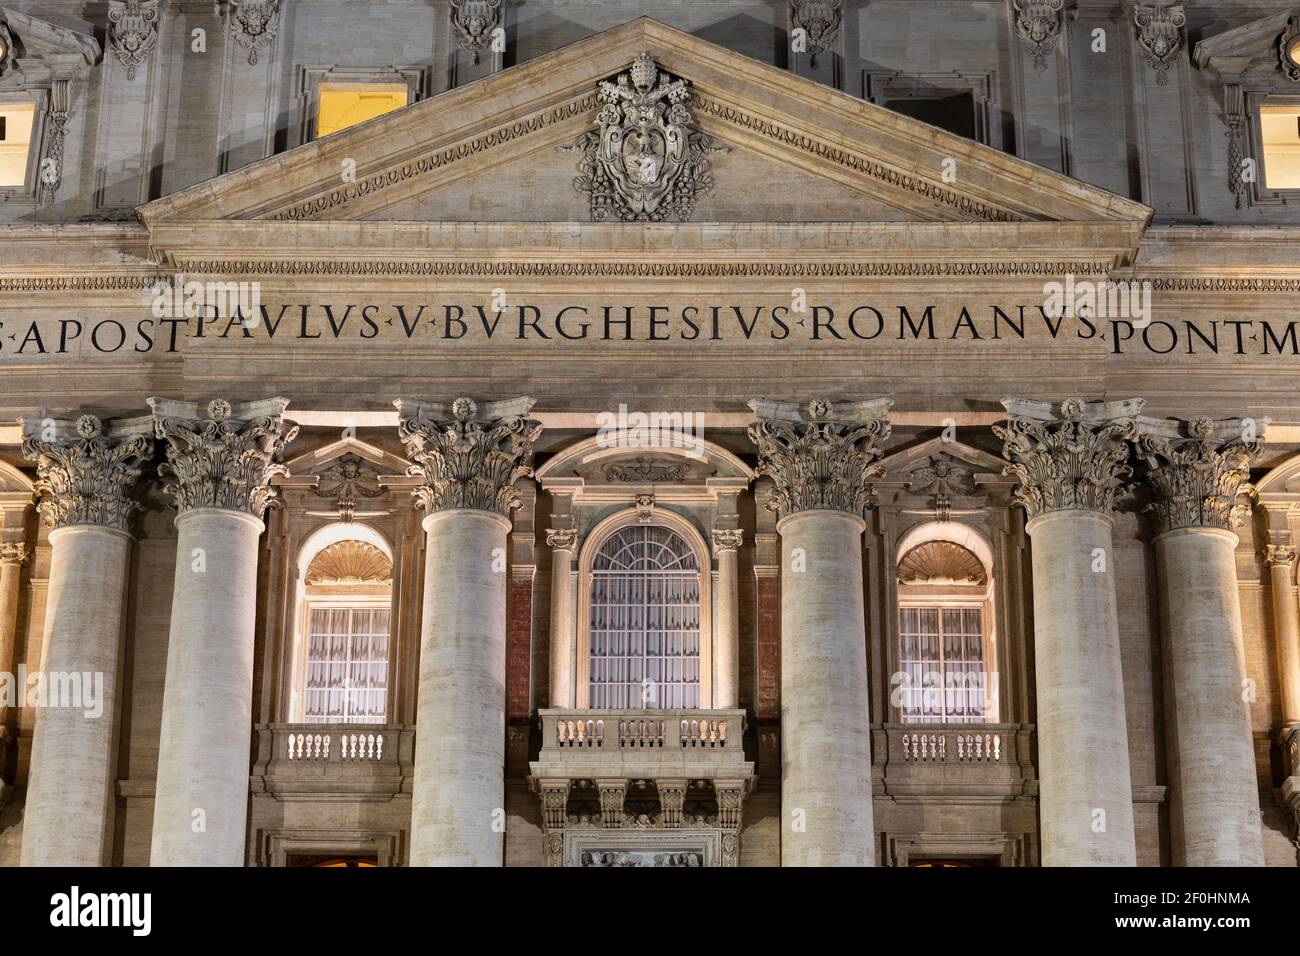 Pediment and Pope window with balcony in Papal Basilica of Saint Peter in the Vatican at night, Rome, Italy Stock Photo